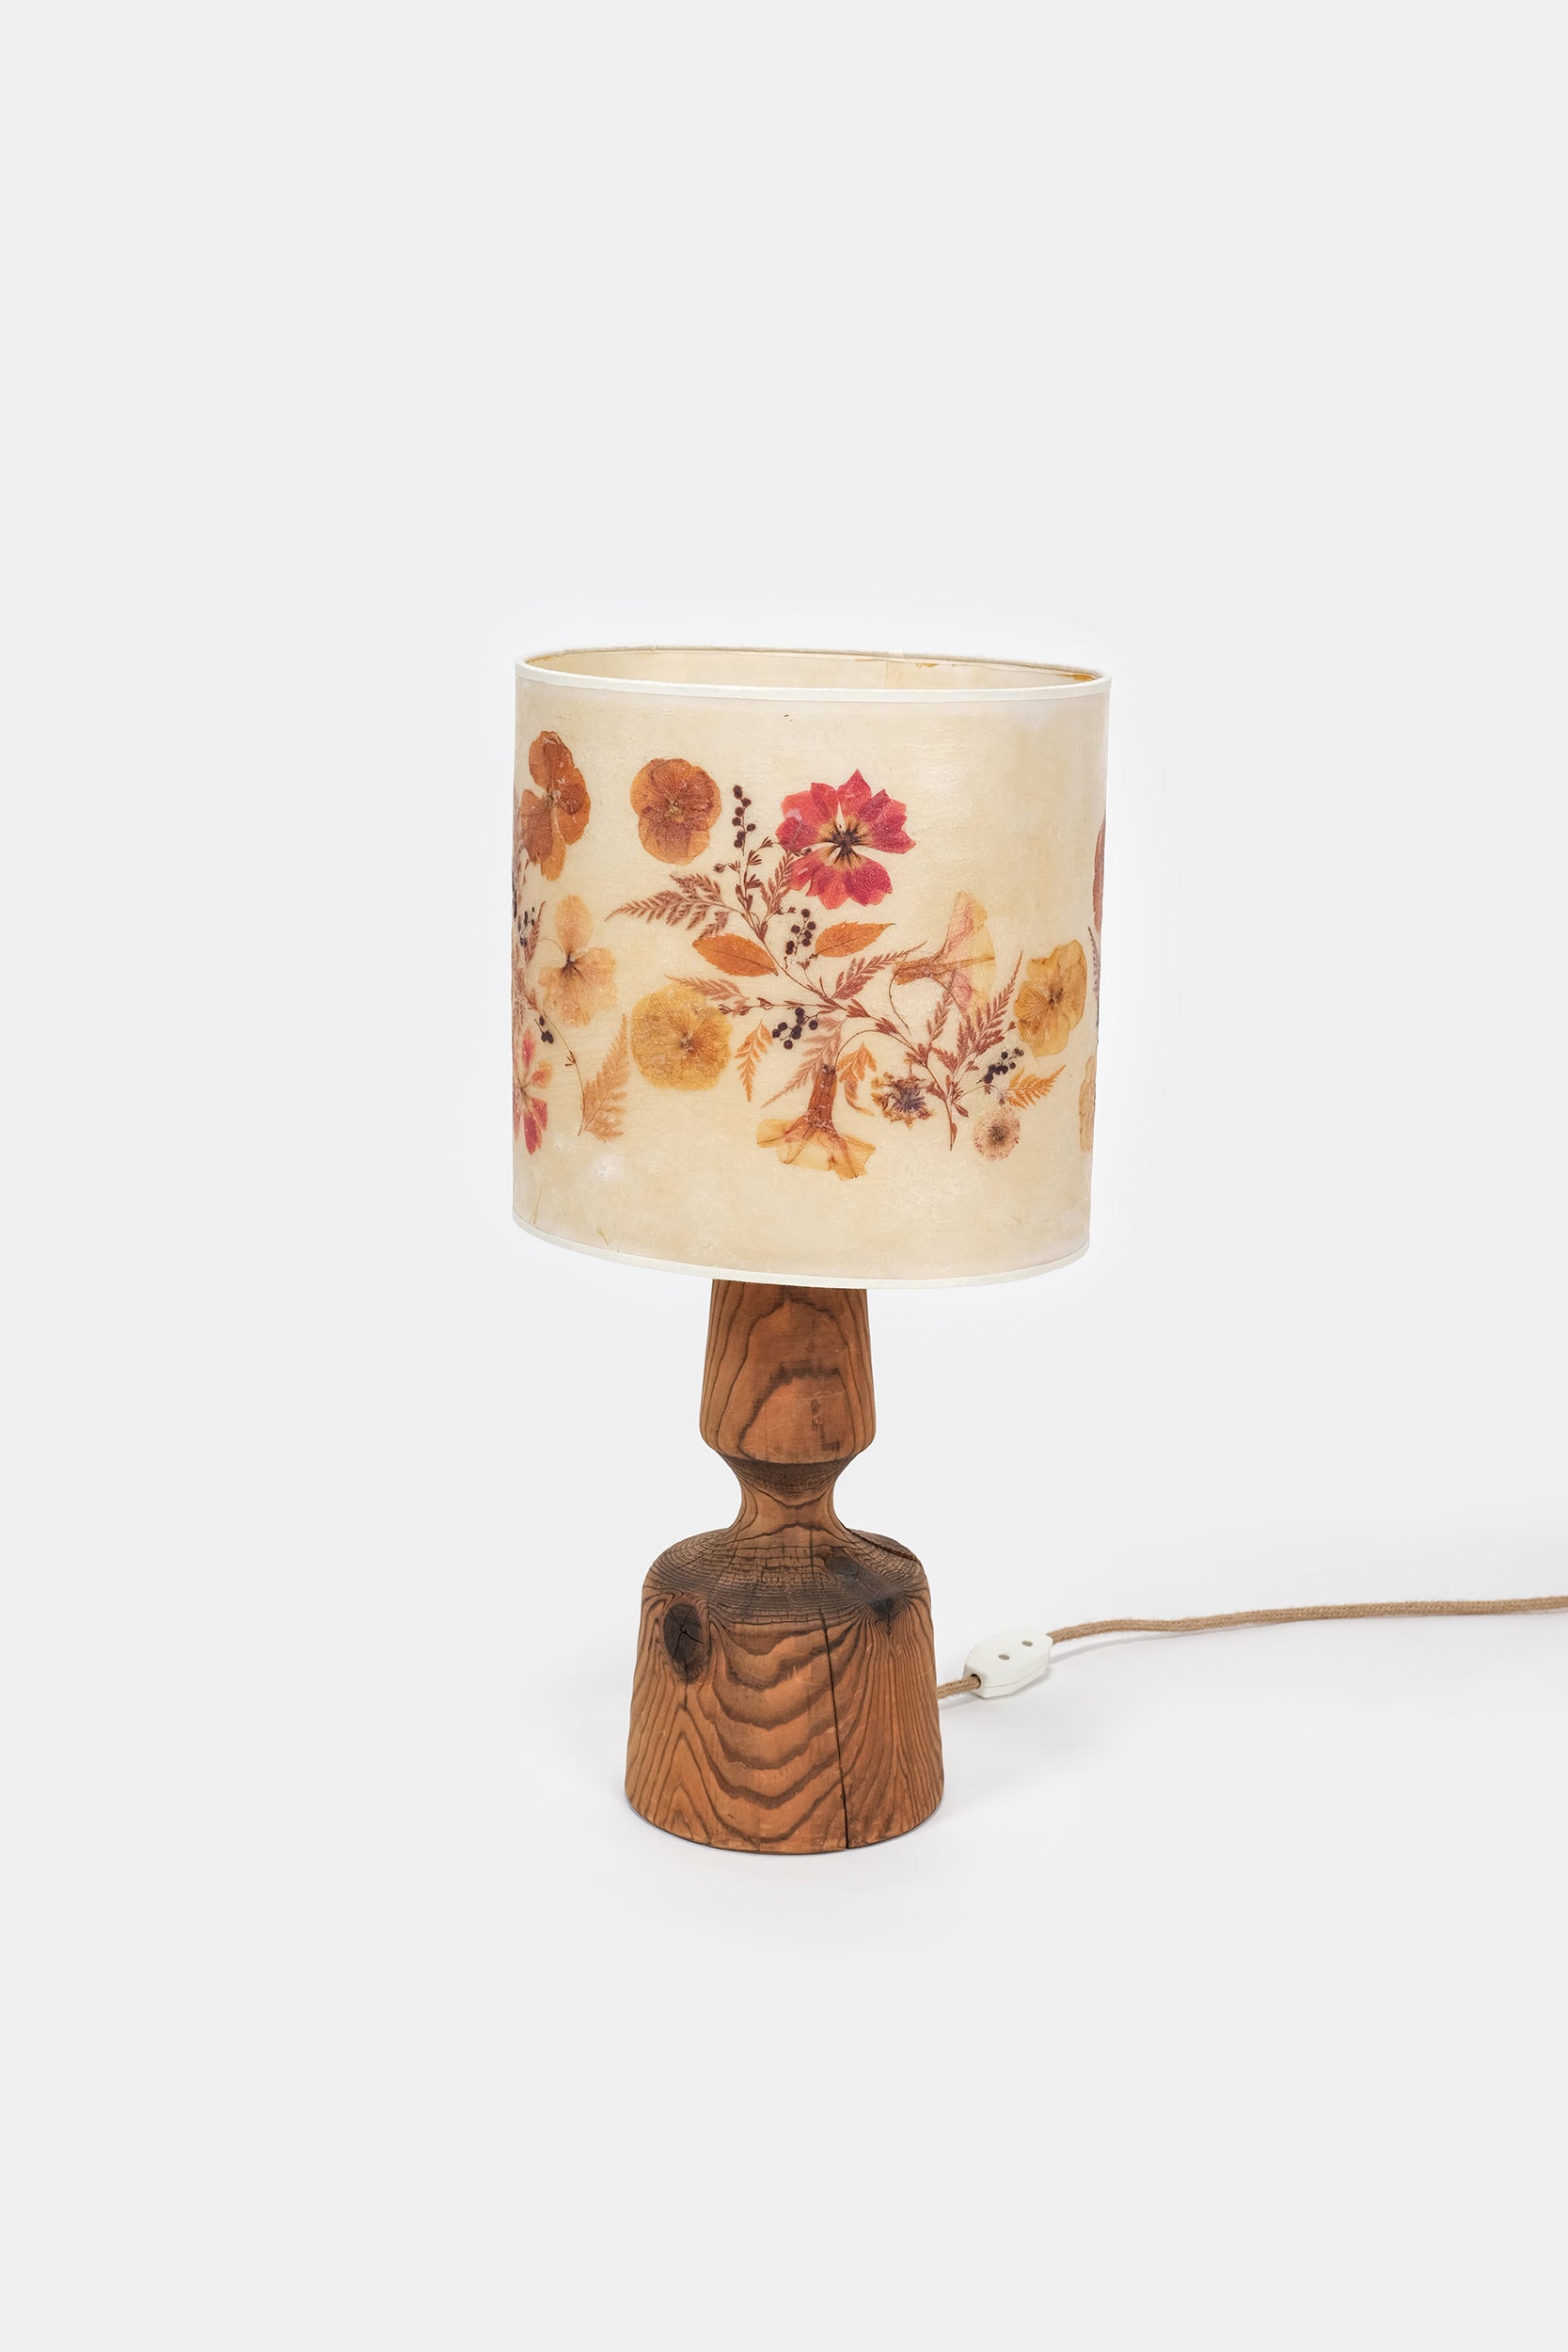 Naturalistic Table Lamp, France, 70s